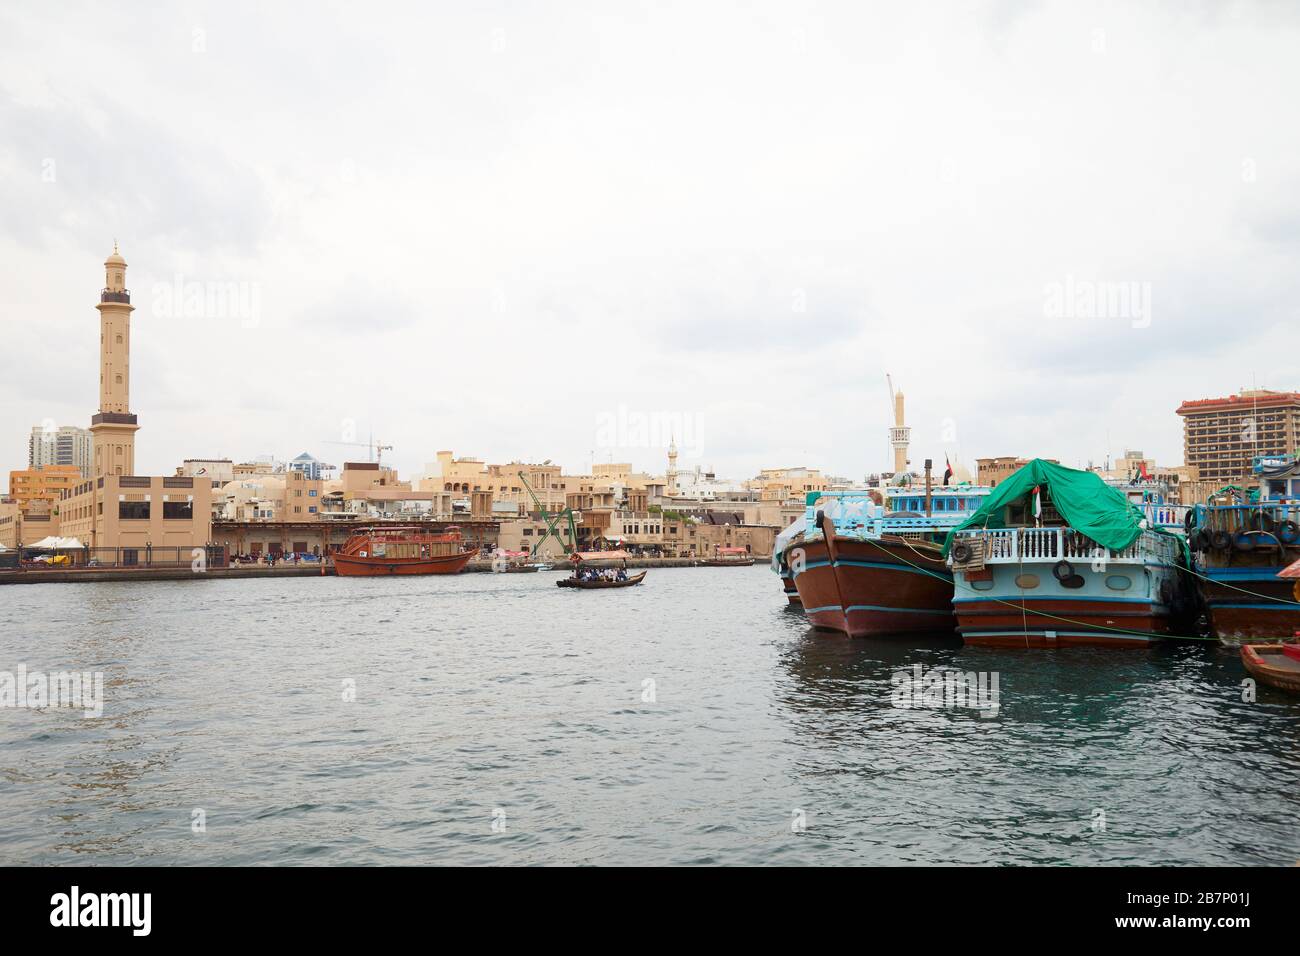 DUBAI, UNITED ARAB EMIRATES - NOVEMBER 21, 2019: Dubai creek, ancient buildings and canal with abra and dhow traditional boats in a cloudy day Stock Photo